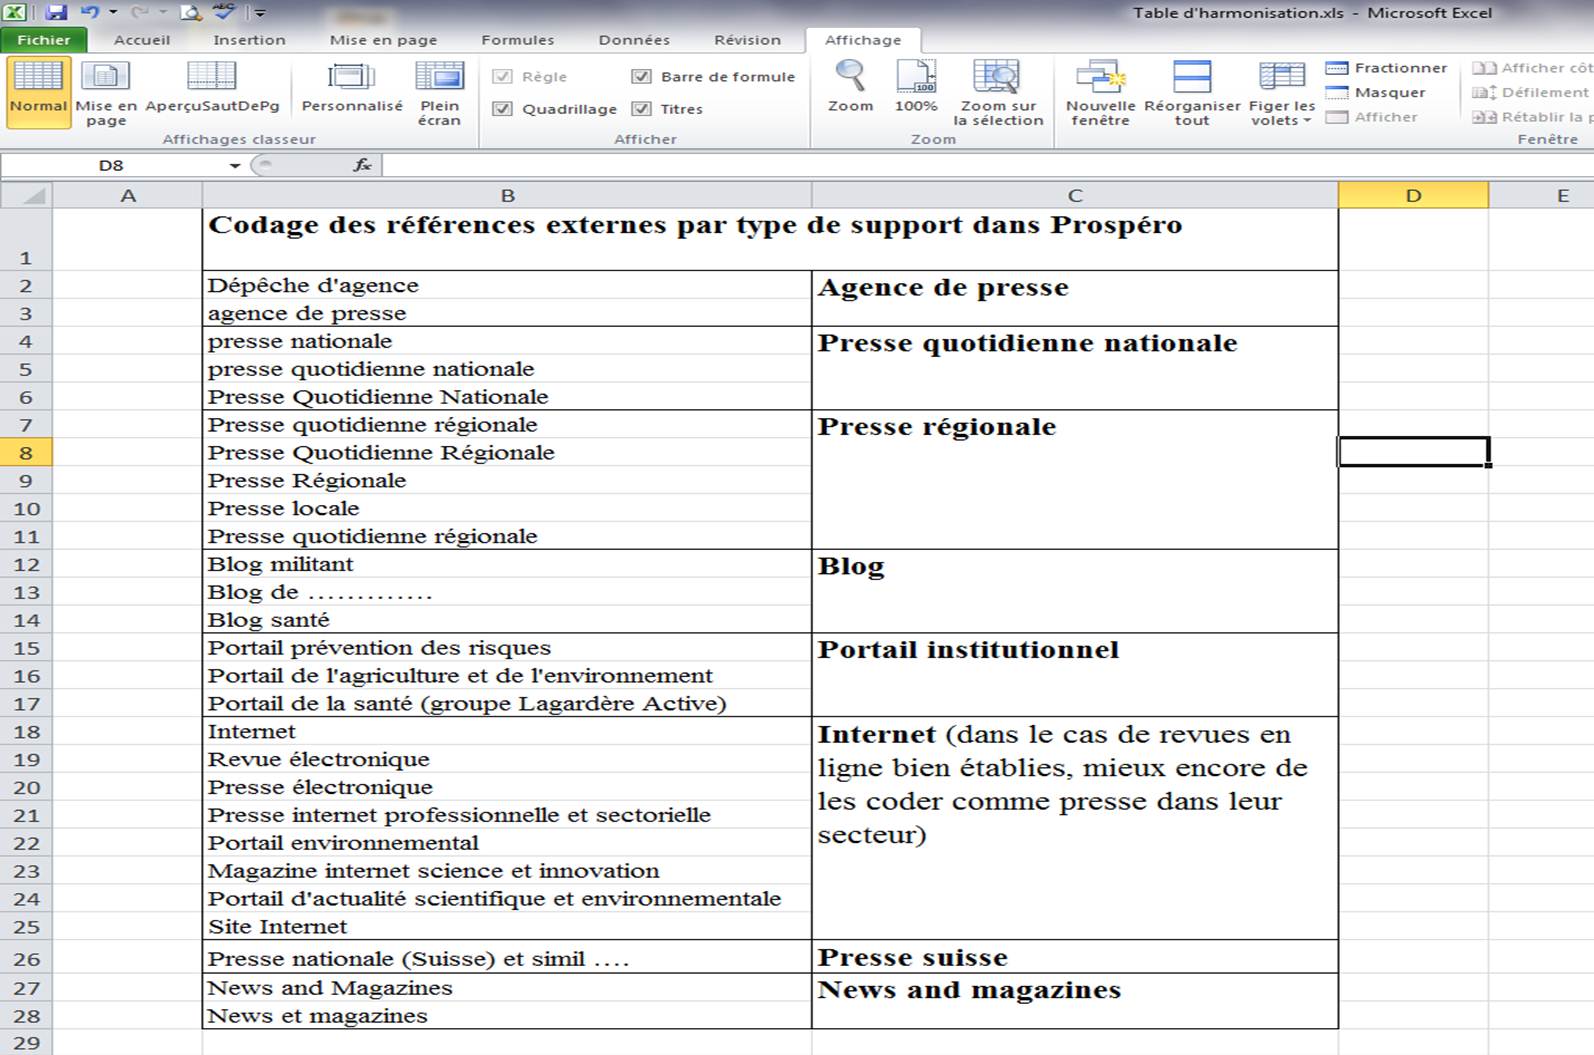 Table codage types de support.jpg